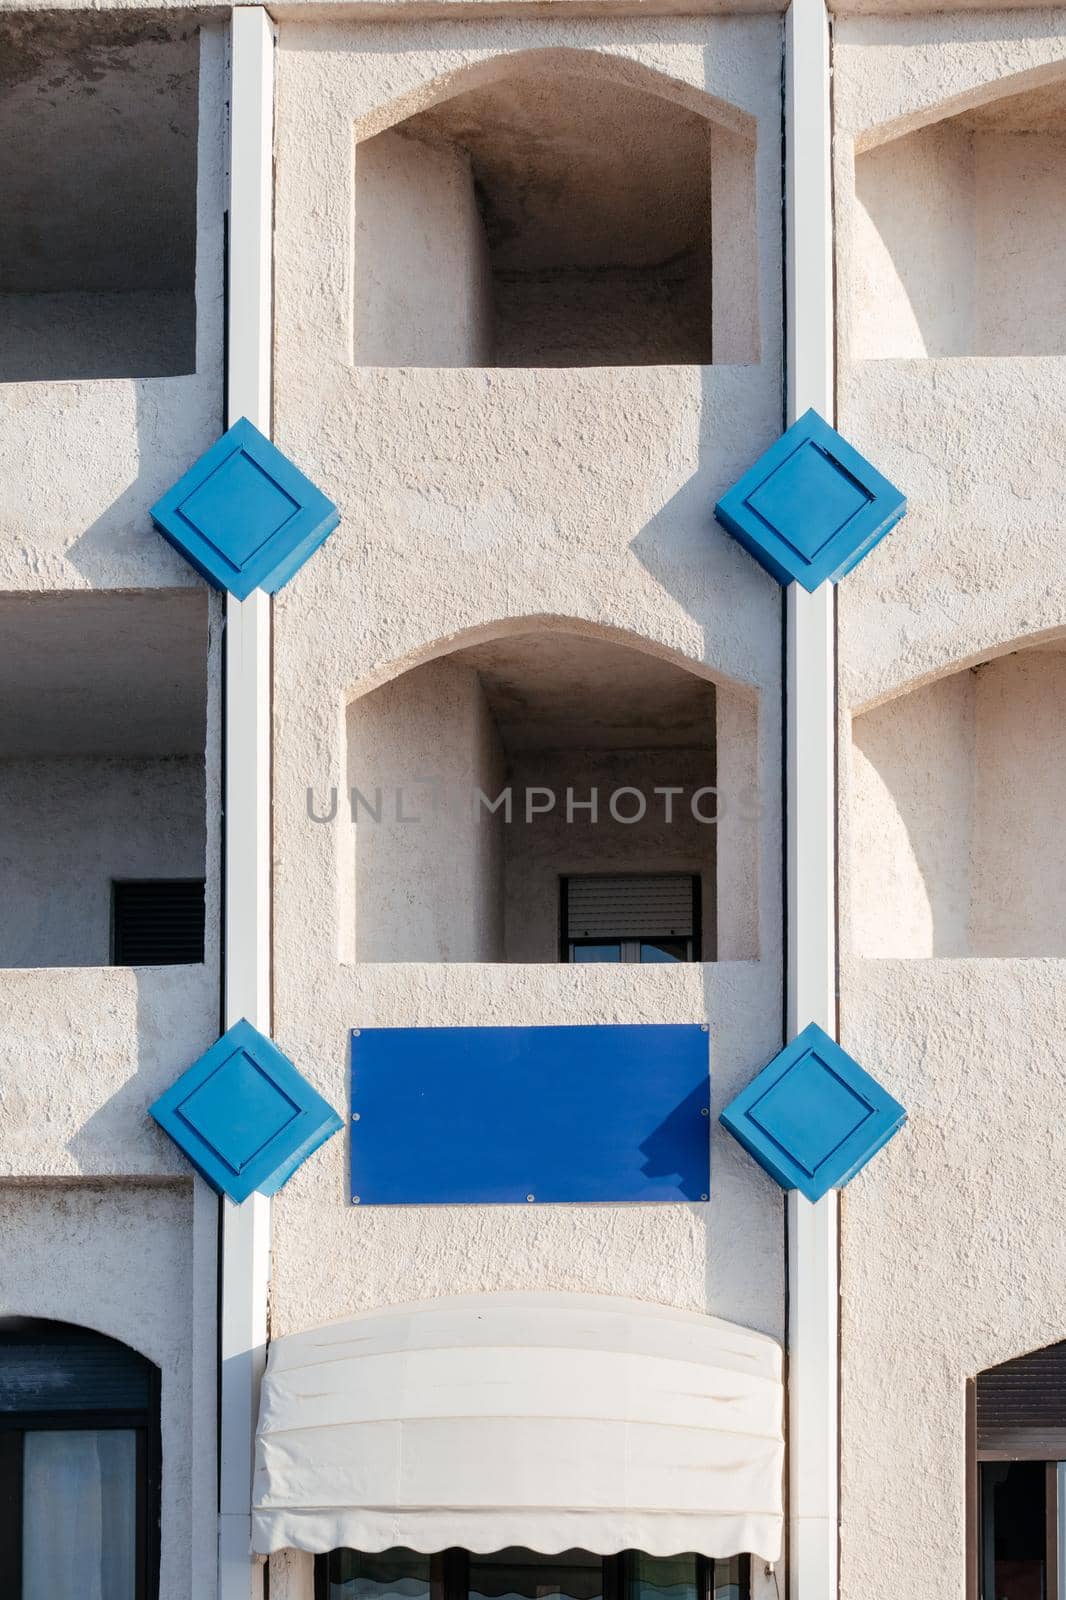 Typical white house facade part in italian city near the sea. Mediterranean village architecture. by photolime